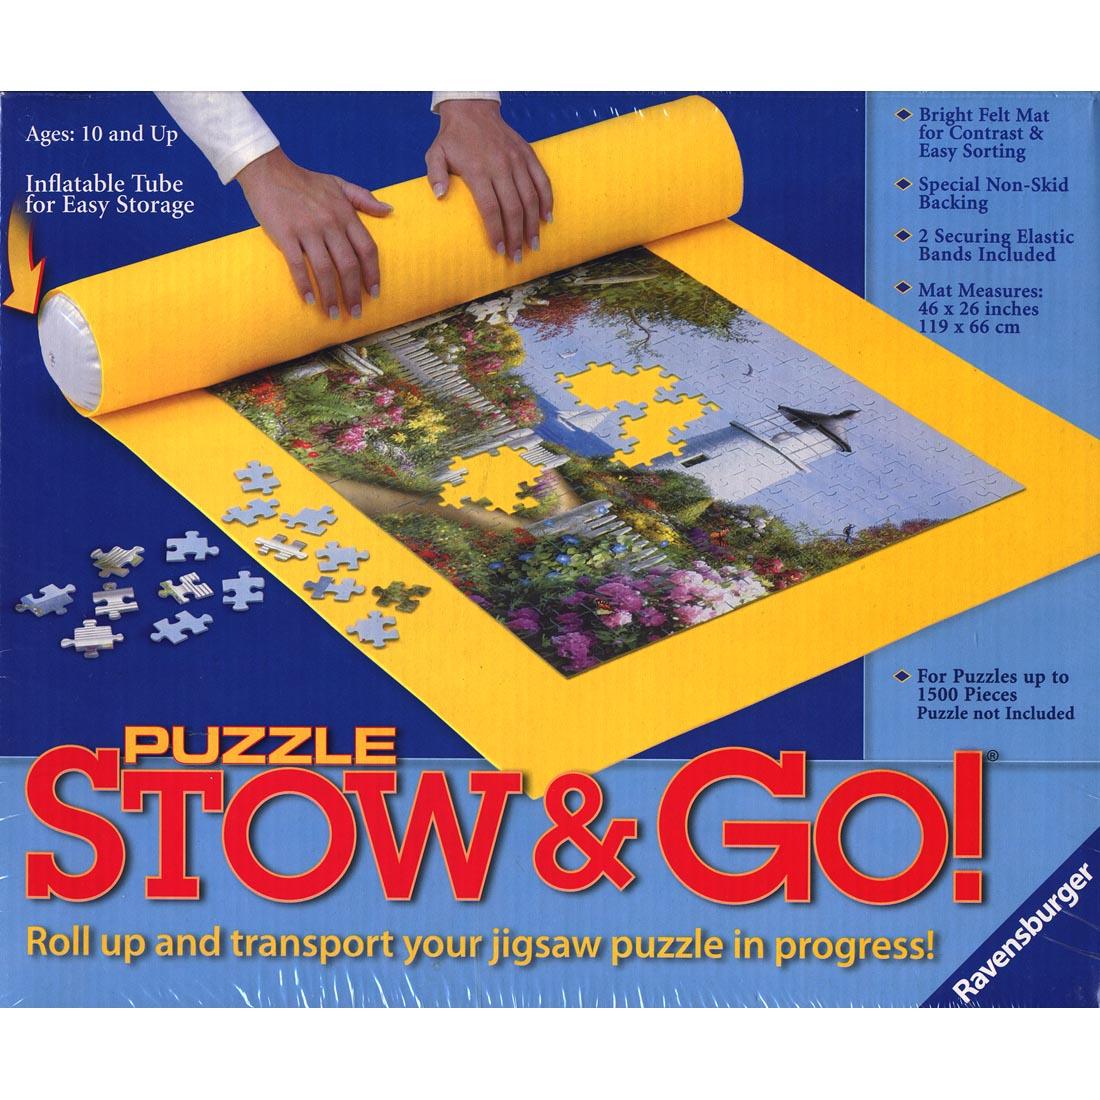 Puzzle Stow & Go! by Ravensburger